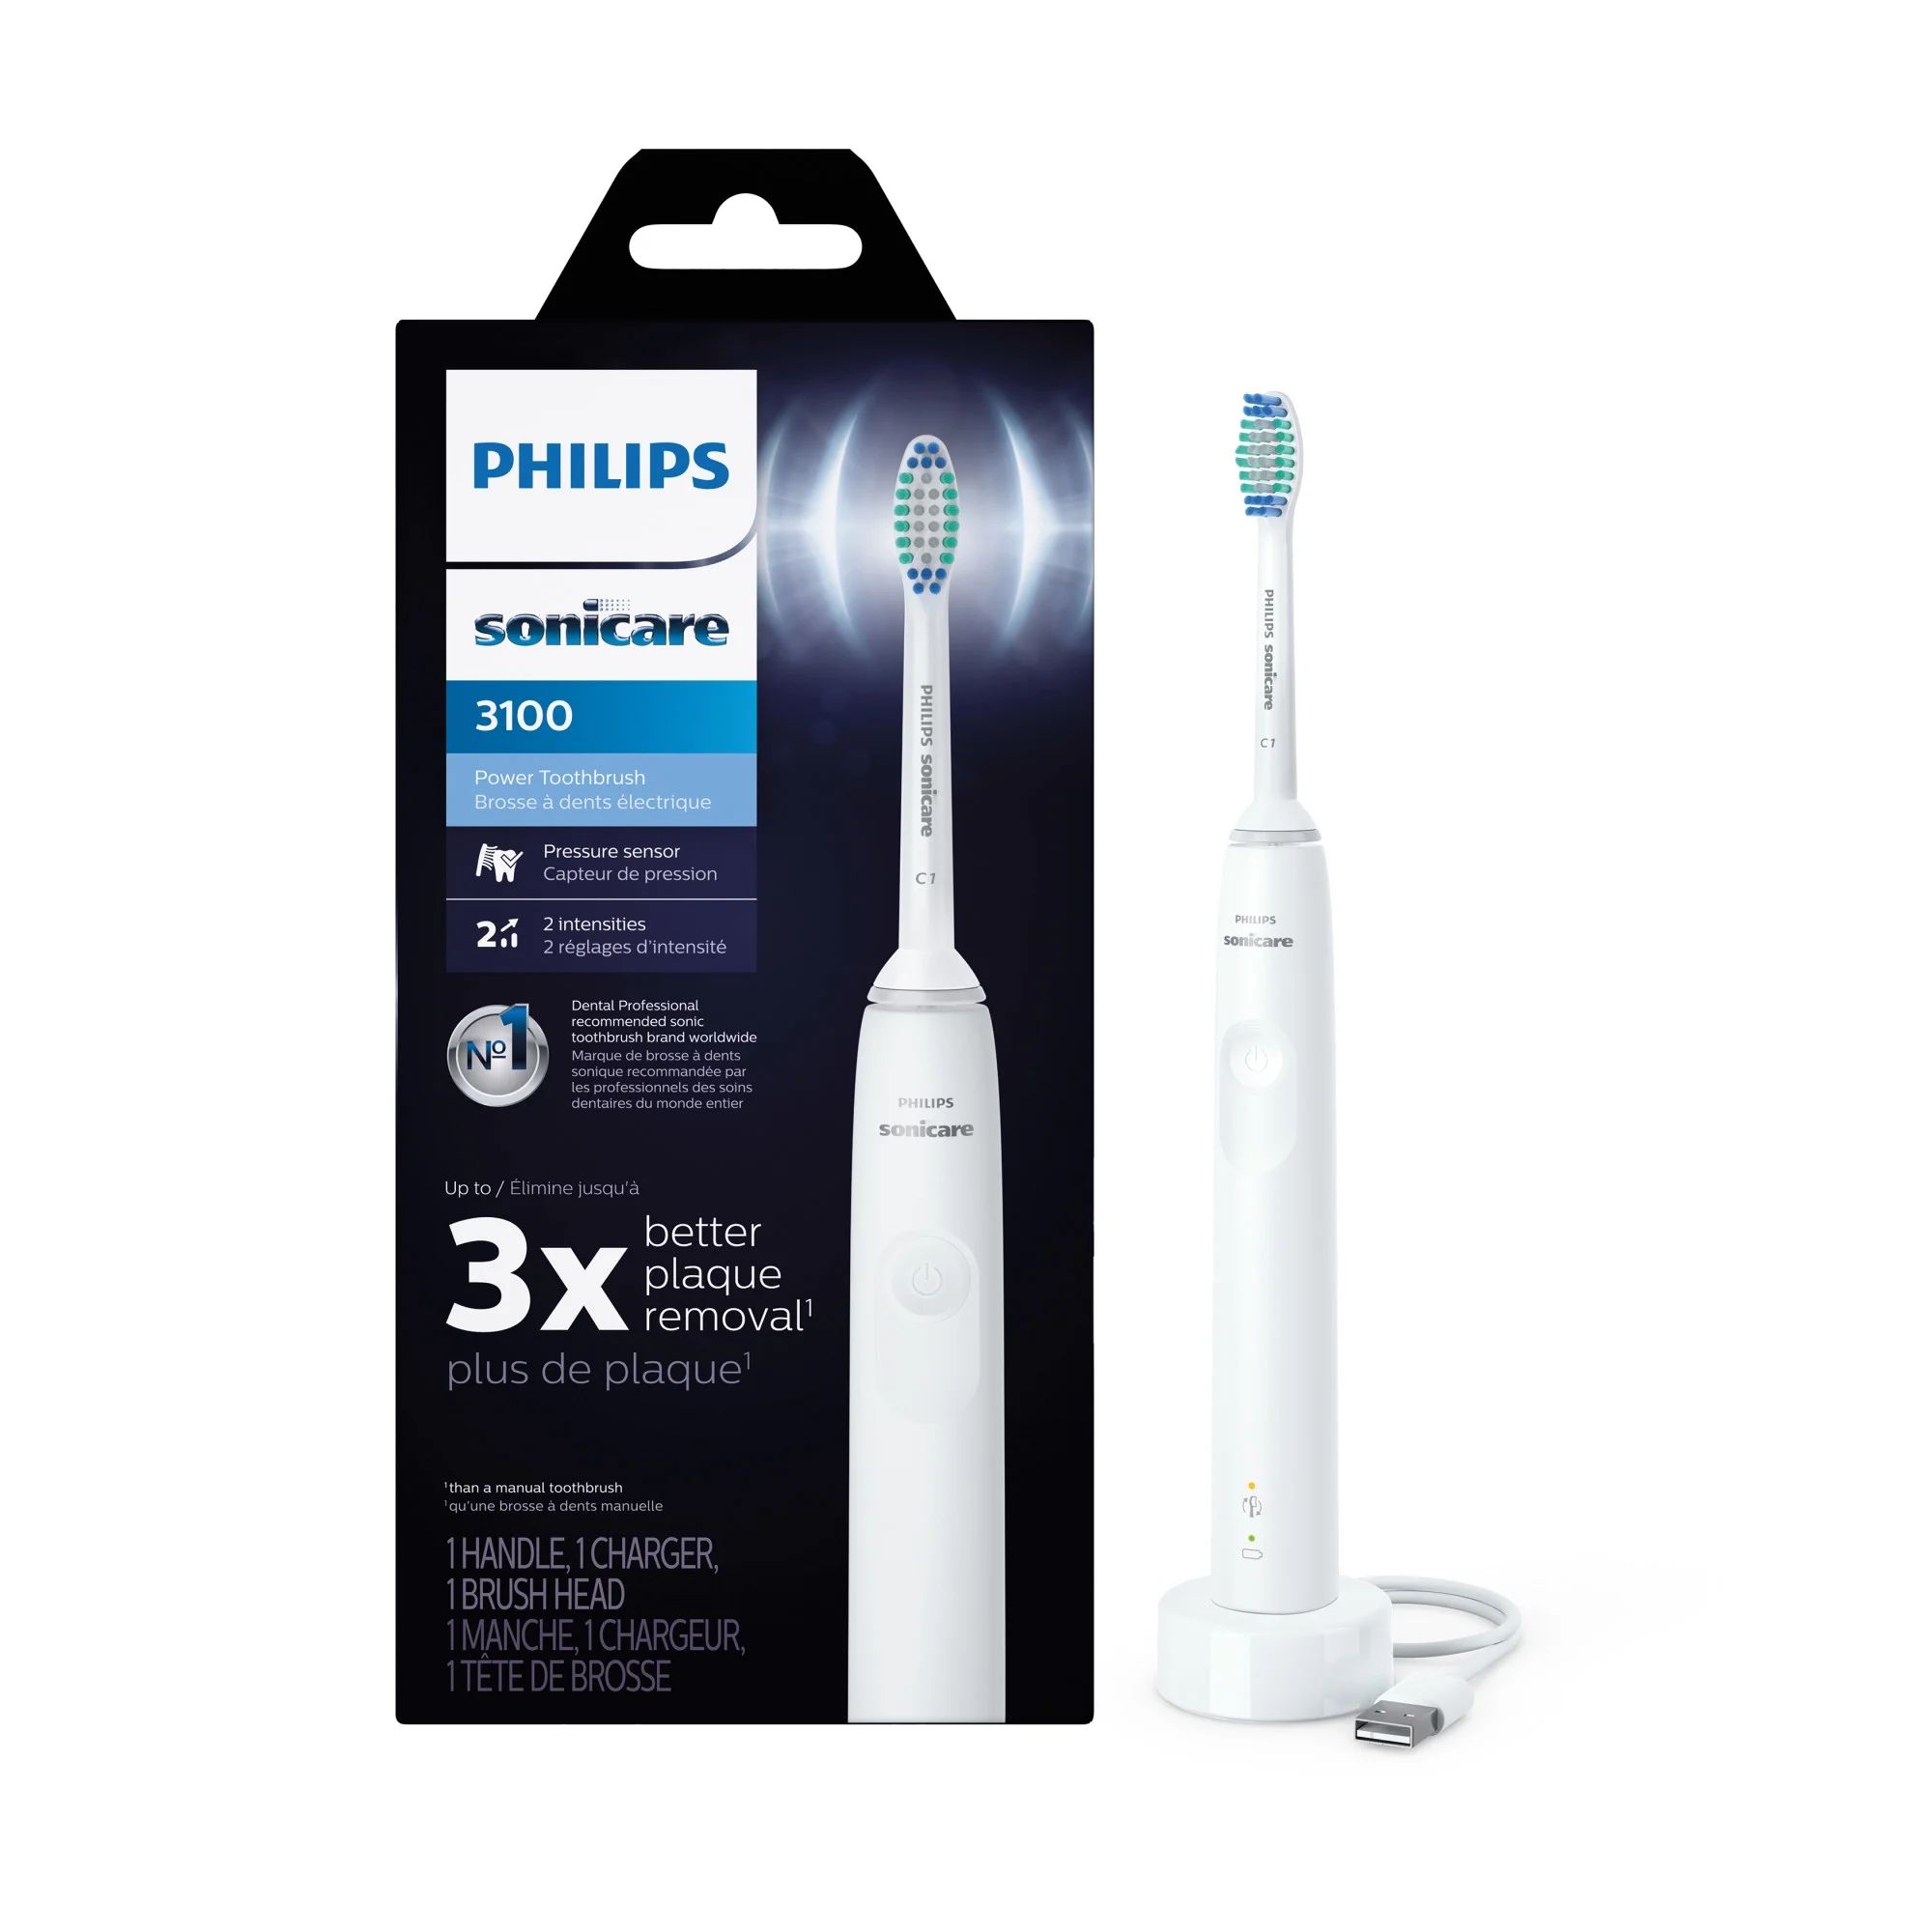 Philips Sonicare 3100 Rechargeable Electric Toothbrush with Pressure Sensor, White HX3681/03 | Walmart (US)